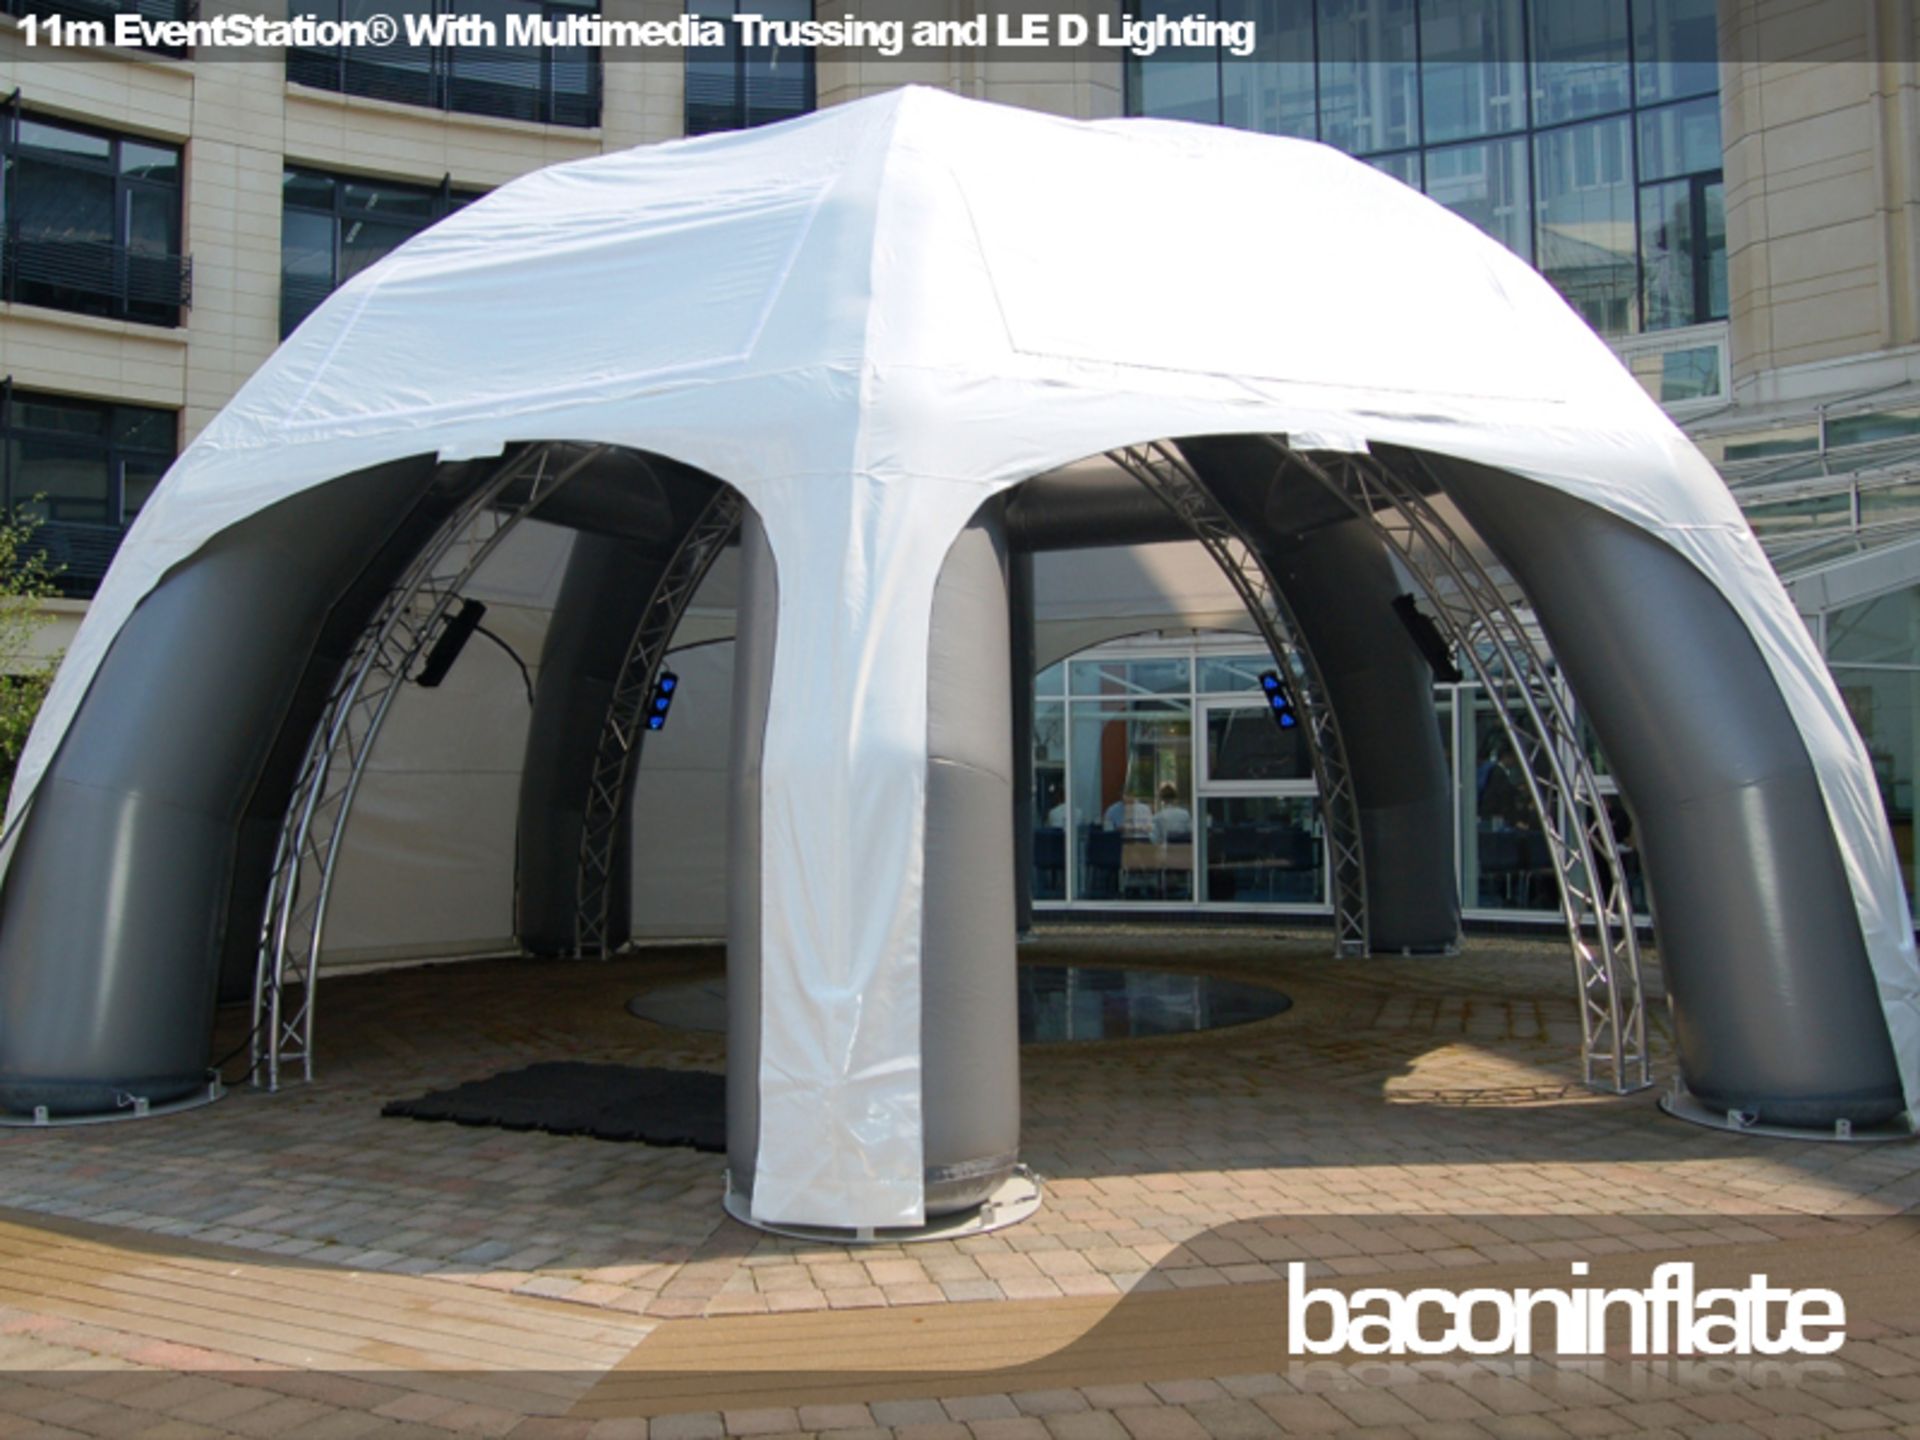 11m EventStation Leg Unit Inflatable Structure with Canopy (2 Bags) (Stock No’s; BiES & BiES 11/ - Image 5 of 12